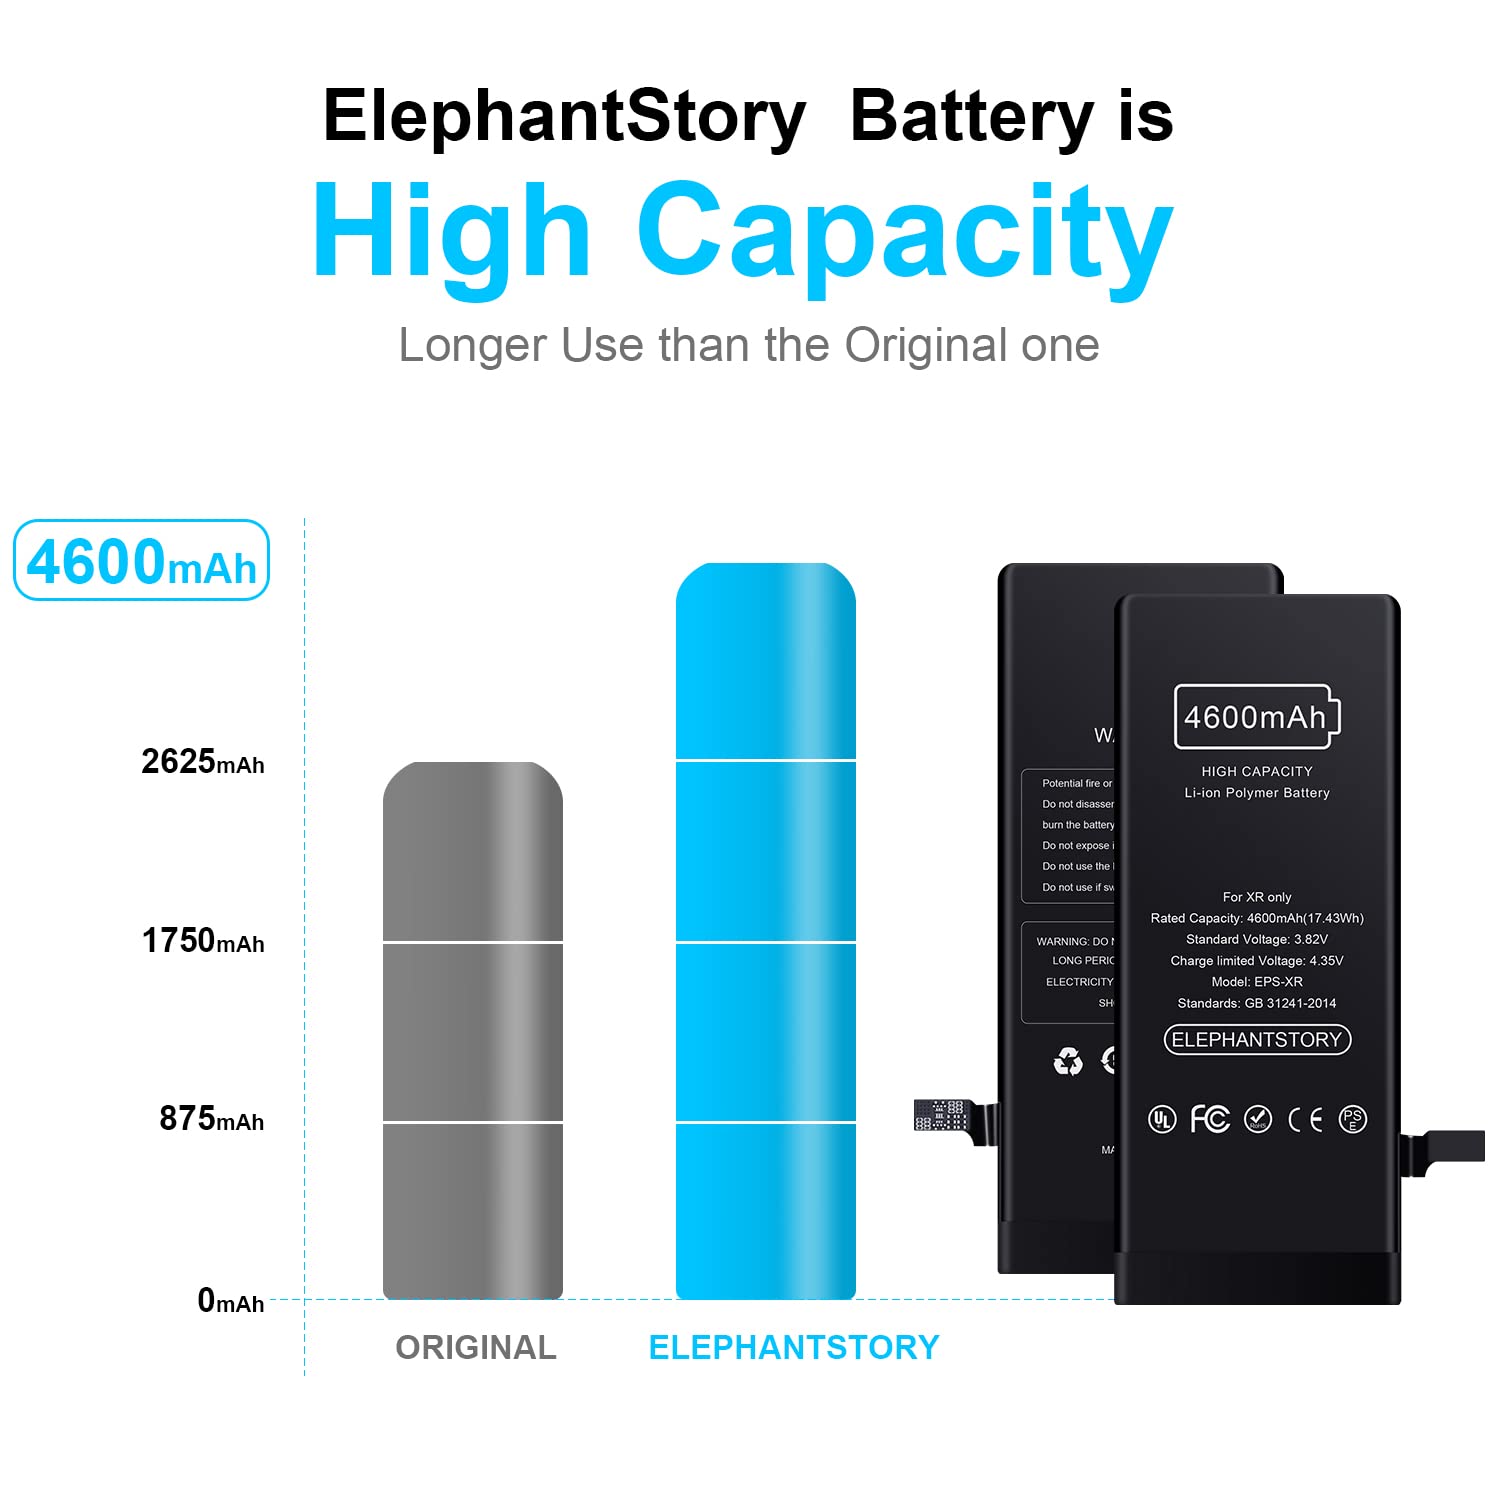 ElephantStory Battery for iPhone XR Battery Replacement, 4600mAh High Capacity New 0 Cycle Internal iPhone XR Battery fit for Model A1984, A2105, A2106, A2107,with Complete Repair Tool